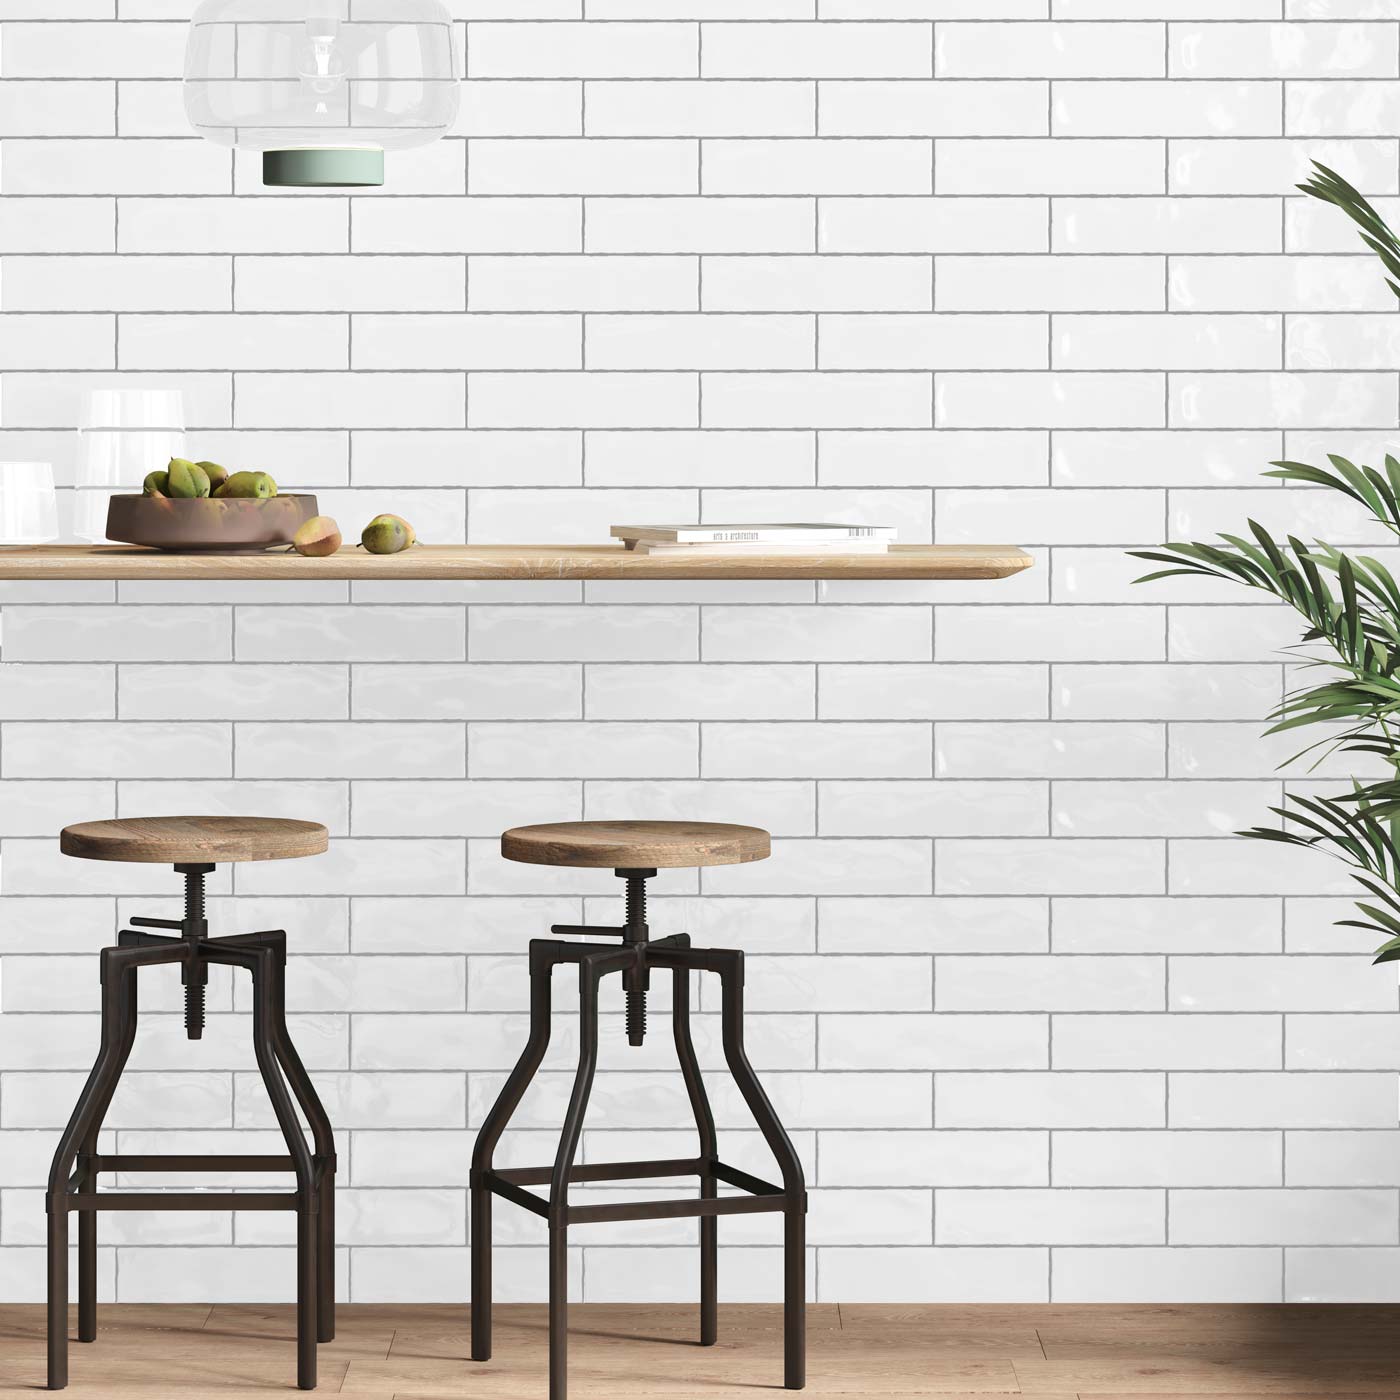 7.5x30cm Cottage white gloss tile with black stools and breakfast bar